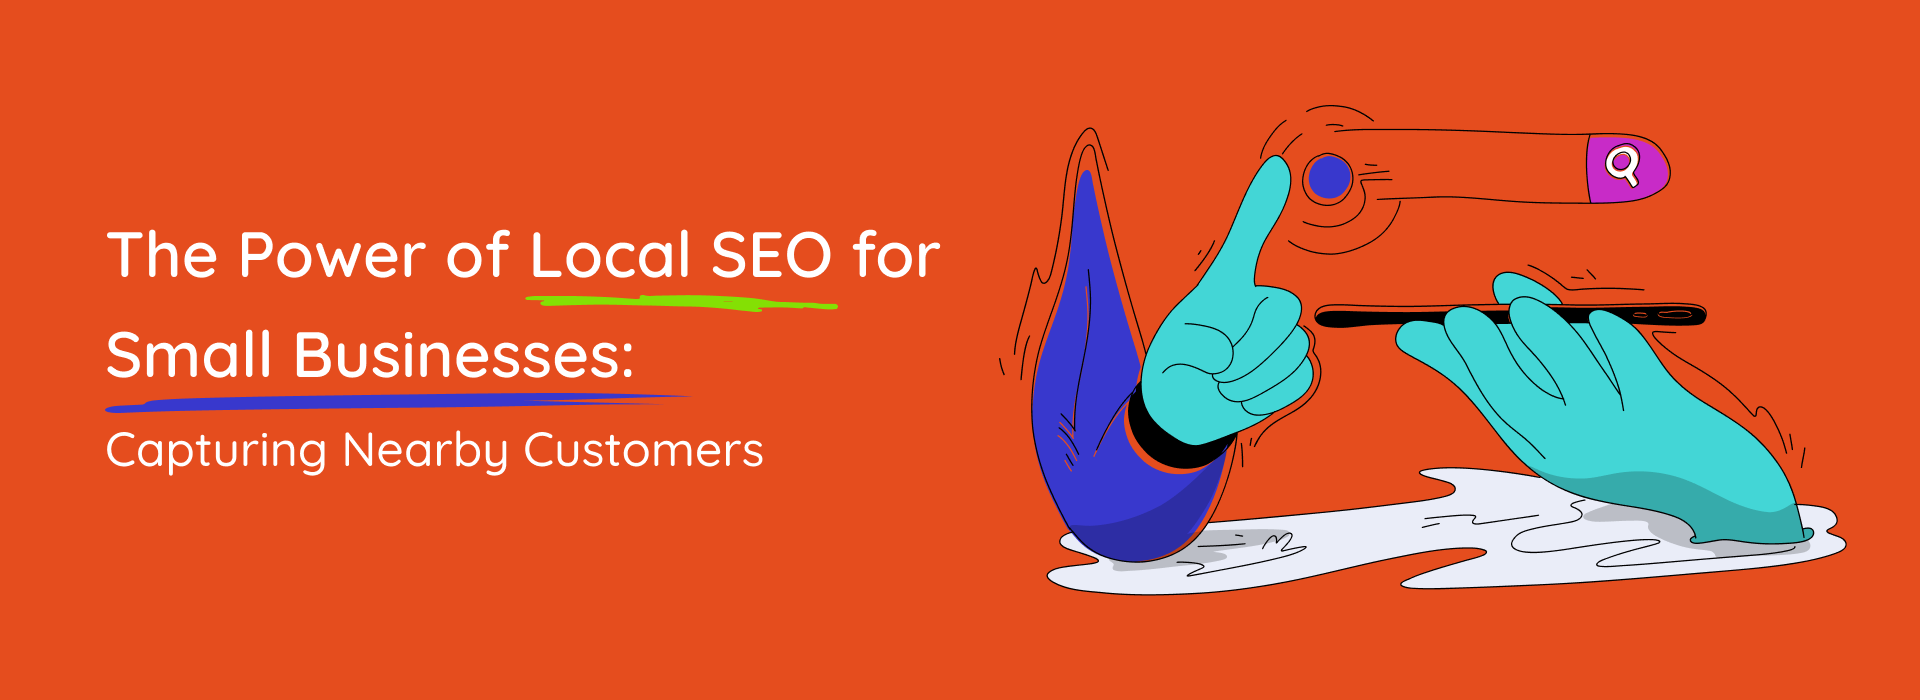 The-Power-of-Local-SEO-for-Small-Businesses